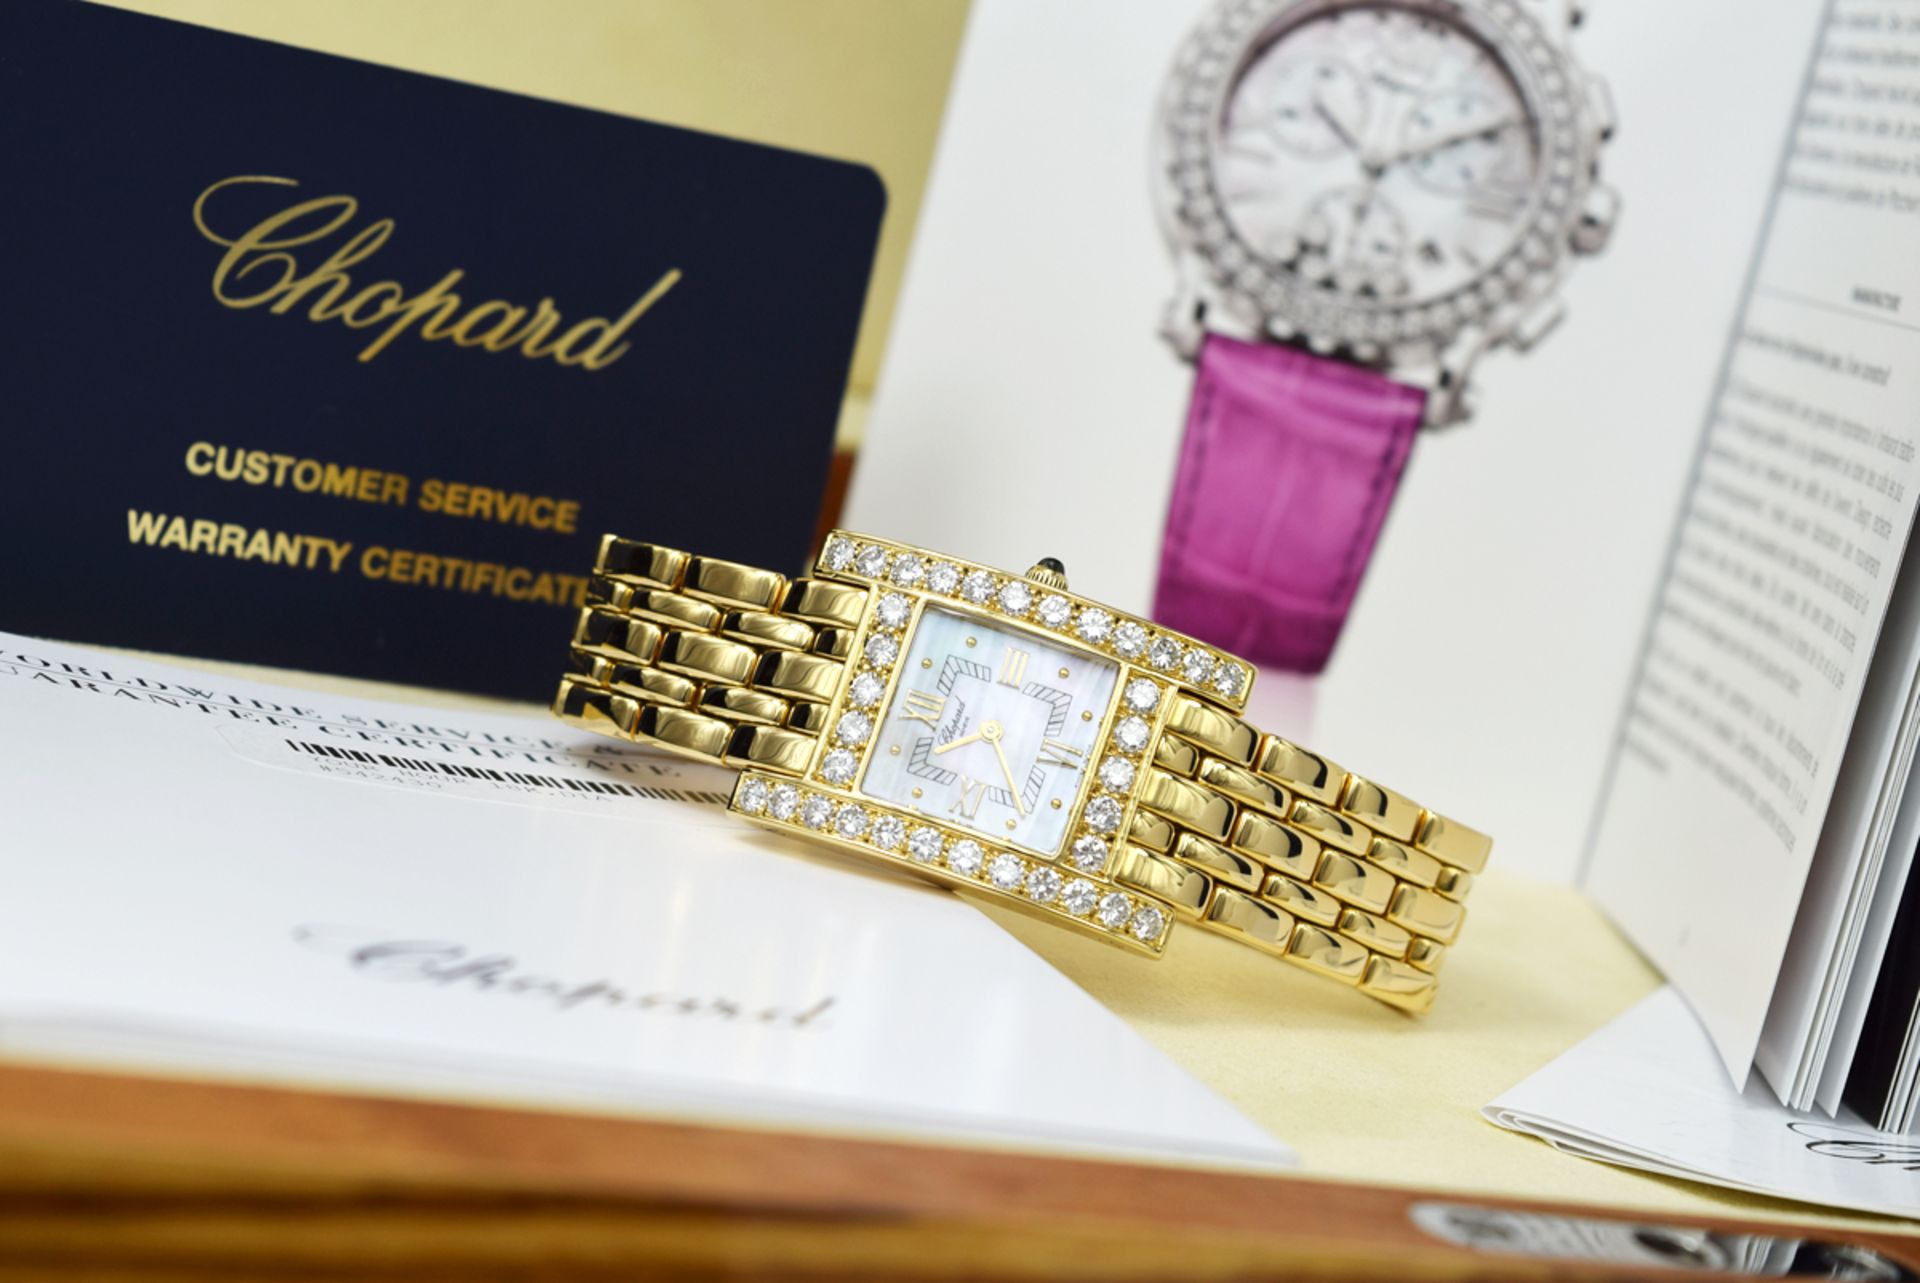 *WOW* Chopard Diamond 'H' / Your Hour 18k Gold and Diamonds w/ Mother of Pearl Dial